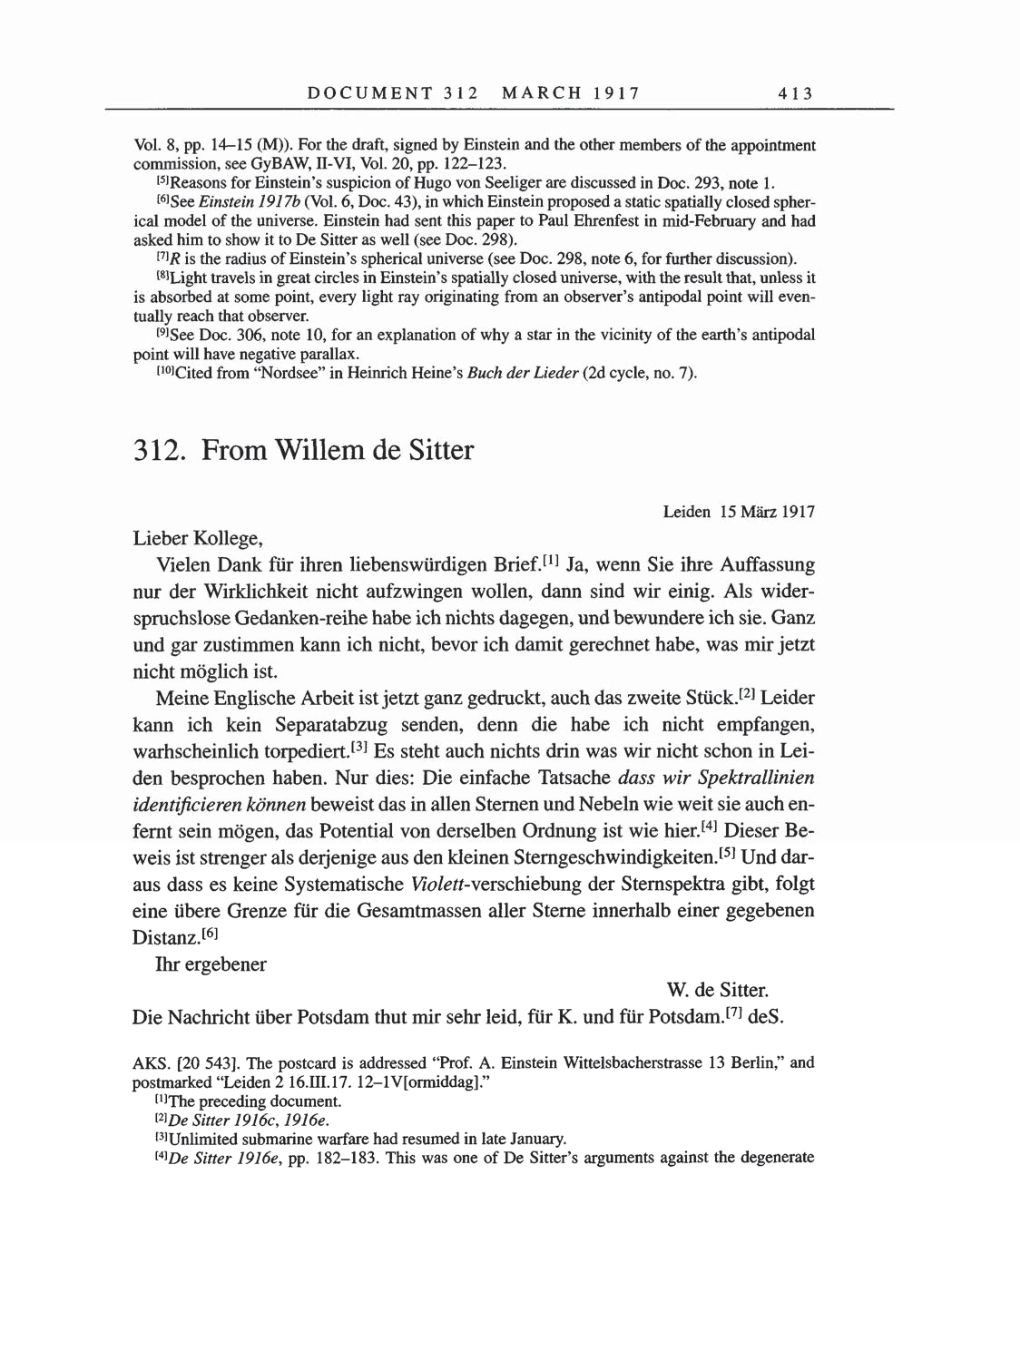 Volume 8, Part A: The Berlin Years: Correspondence 1914-1917 page 413